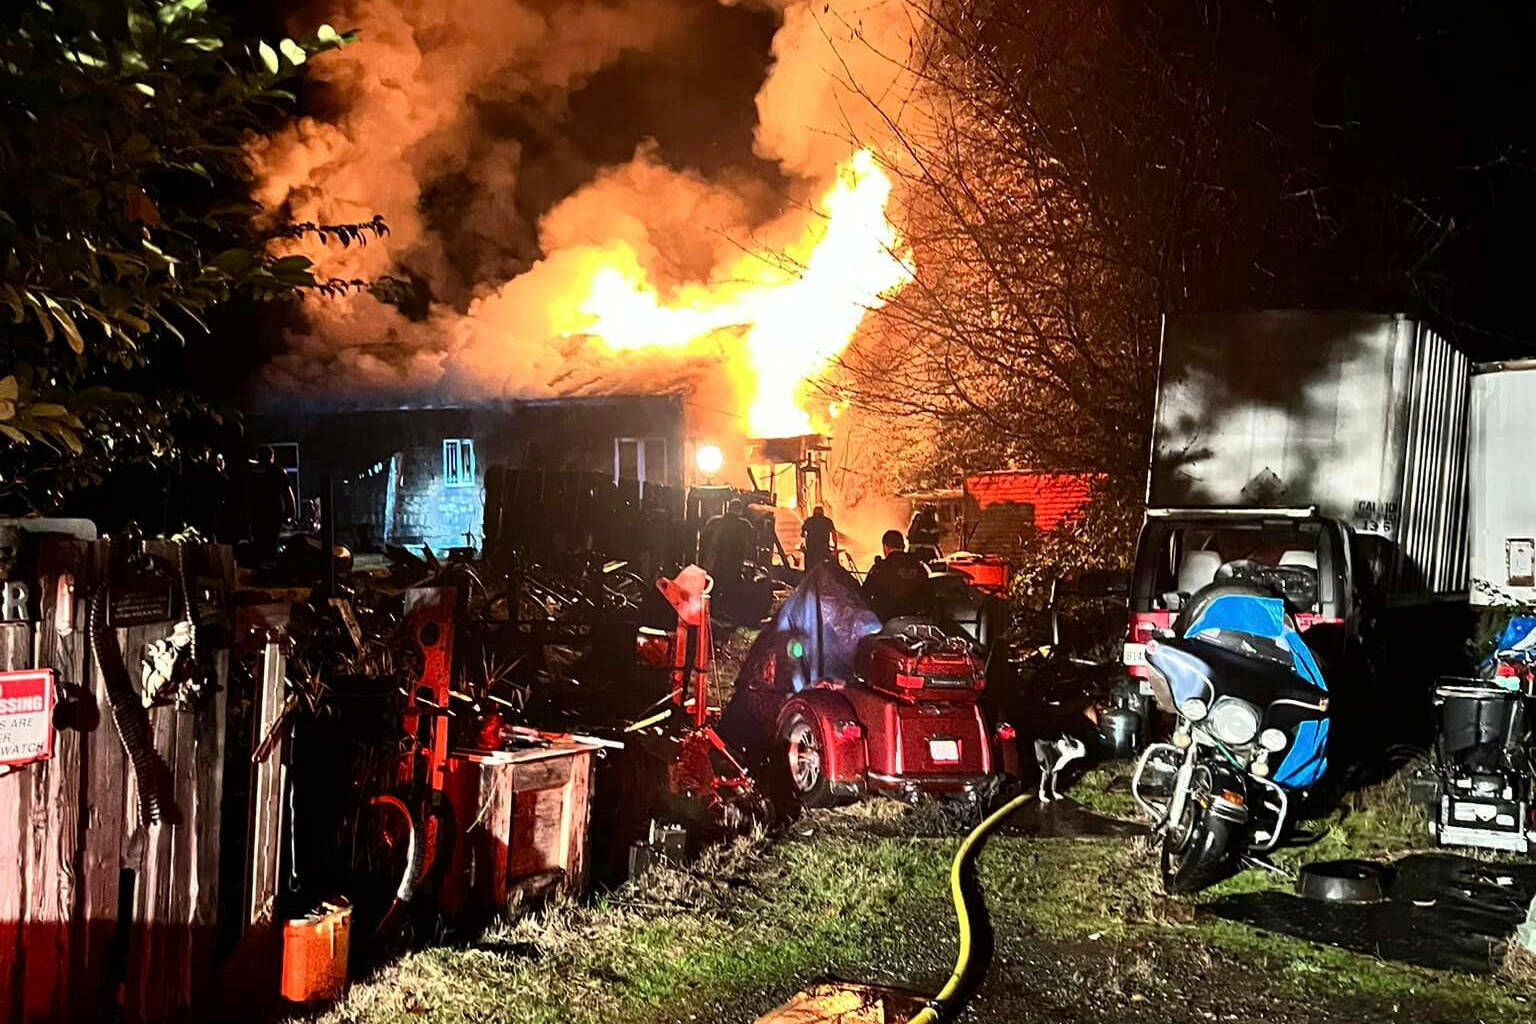 Grays Harbor Fire District 2 and the Montesano Fire Department responded to a structure fire on Nov. 22, resulting in the total loss of the residence. (Screenshot / GHFD2)